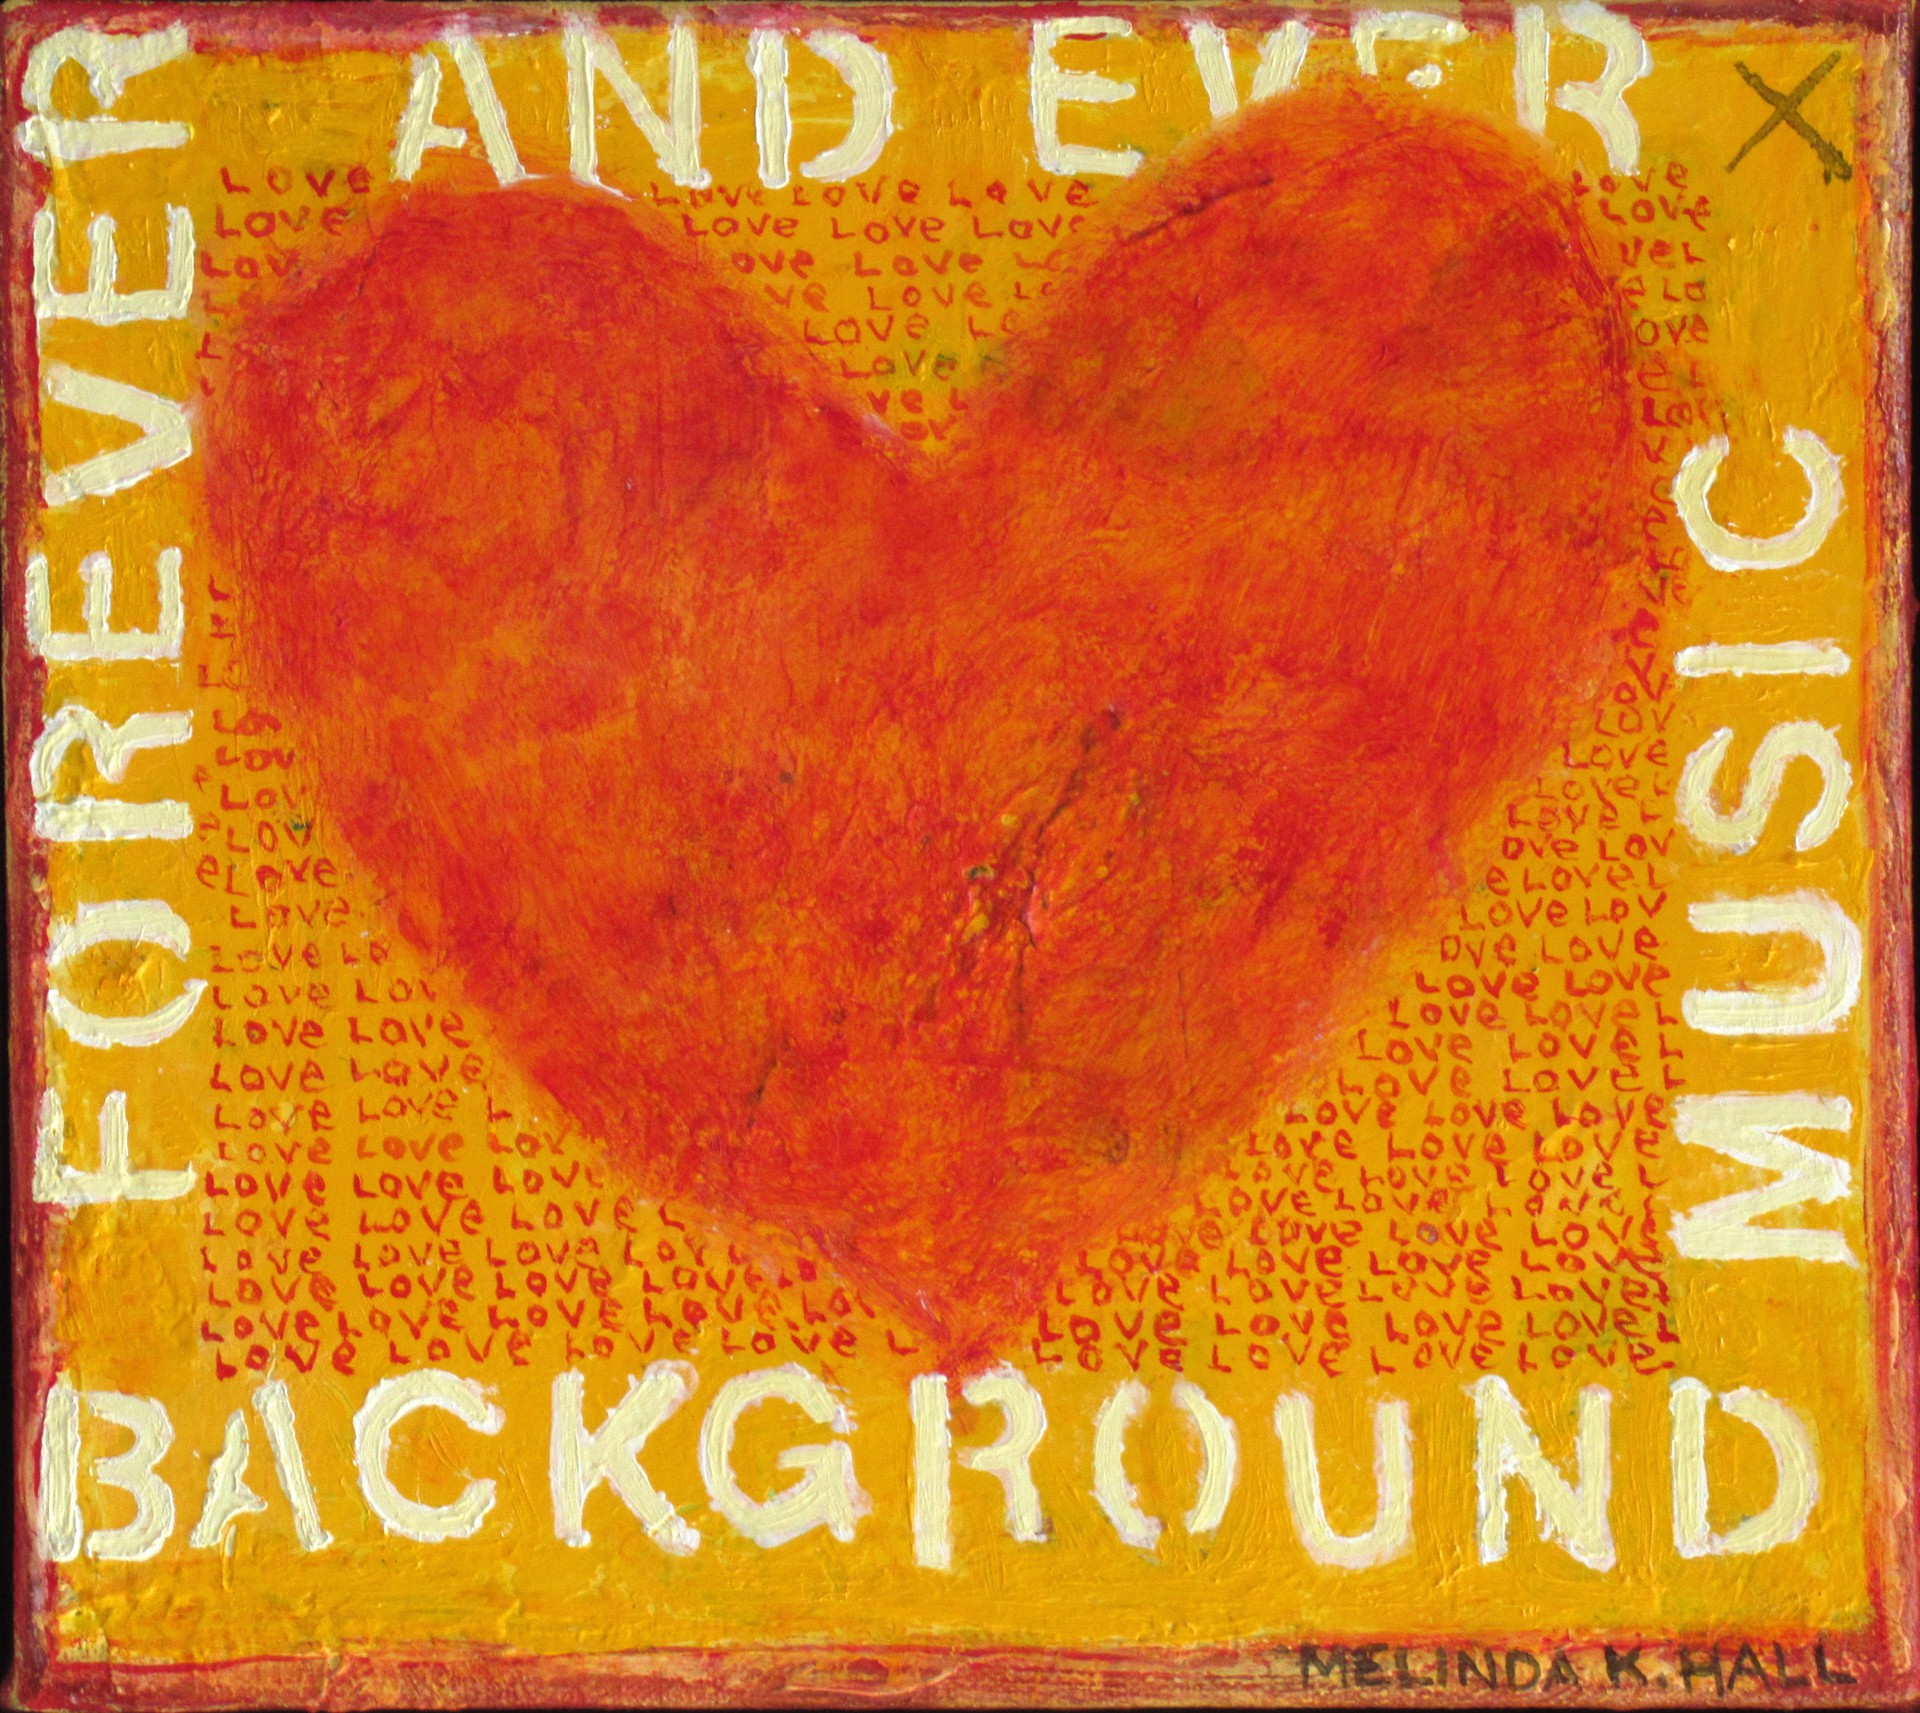 Love:  Background Music Forever and Ever by Melinda K. Hall